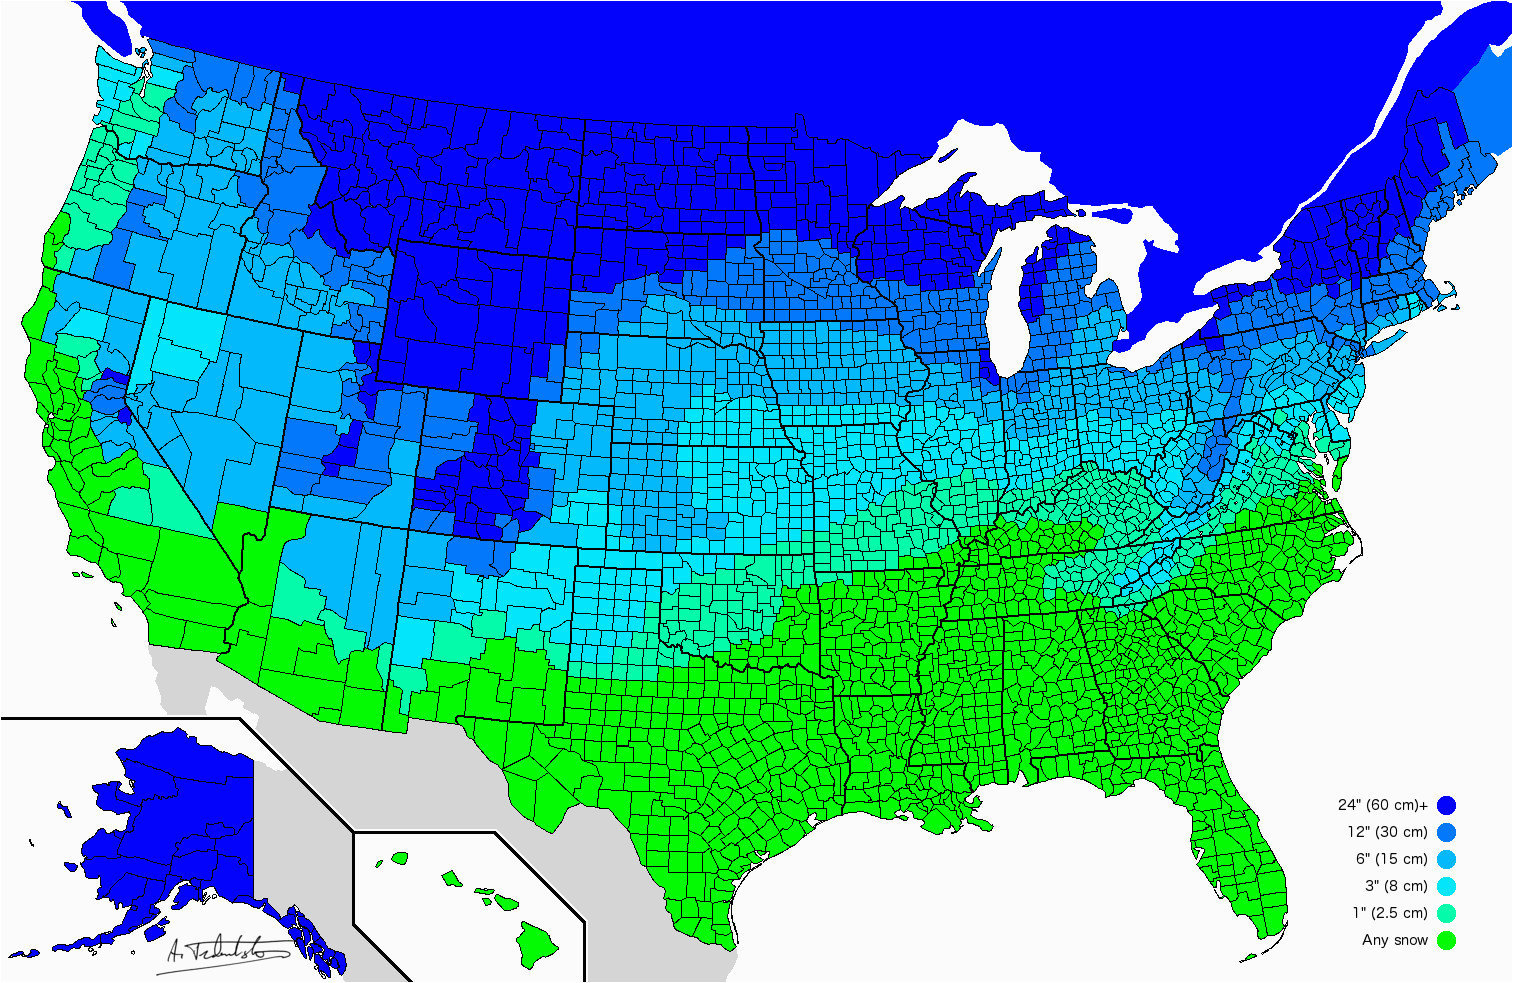 map how much snow it typically takes to cancel school in the u s